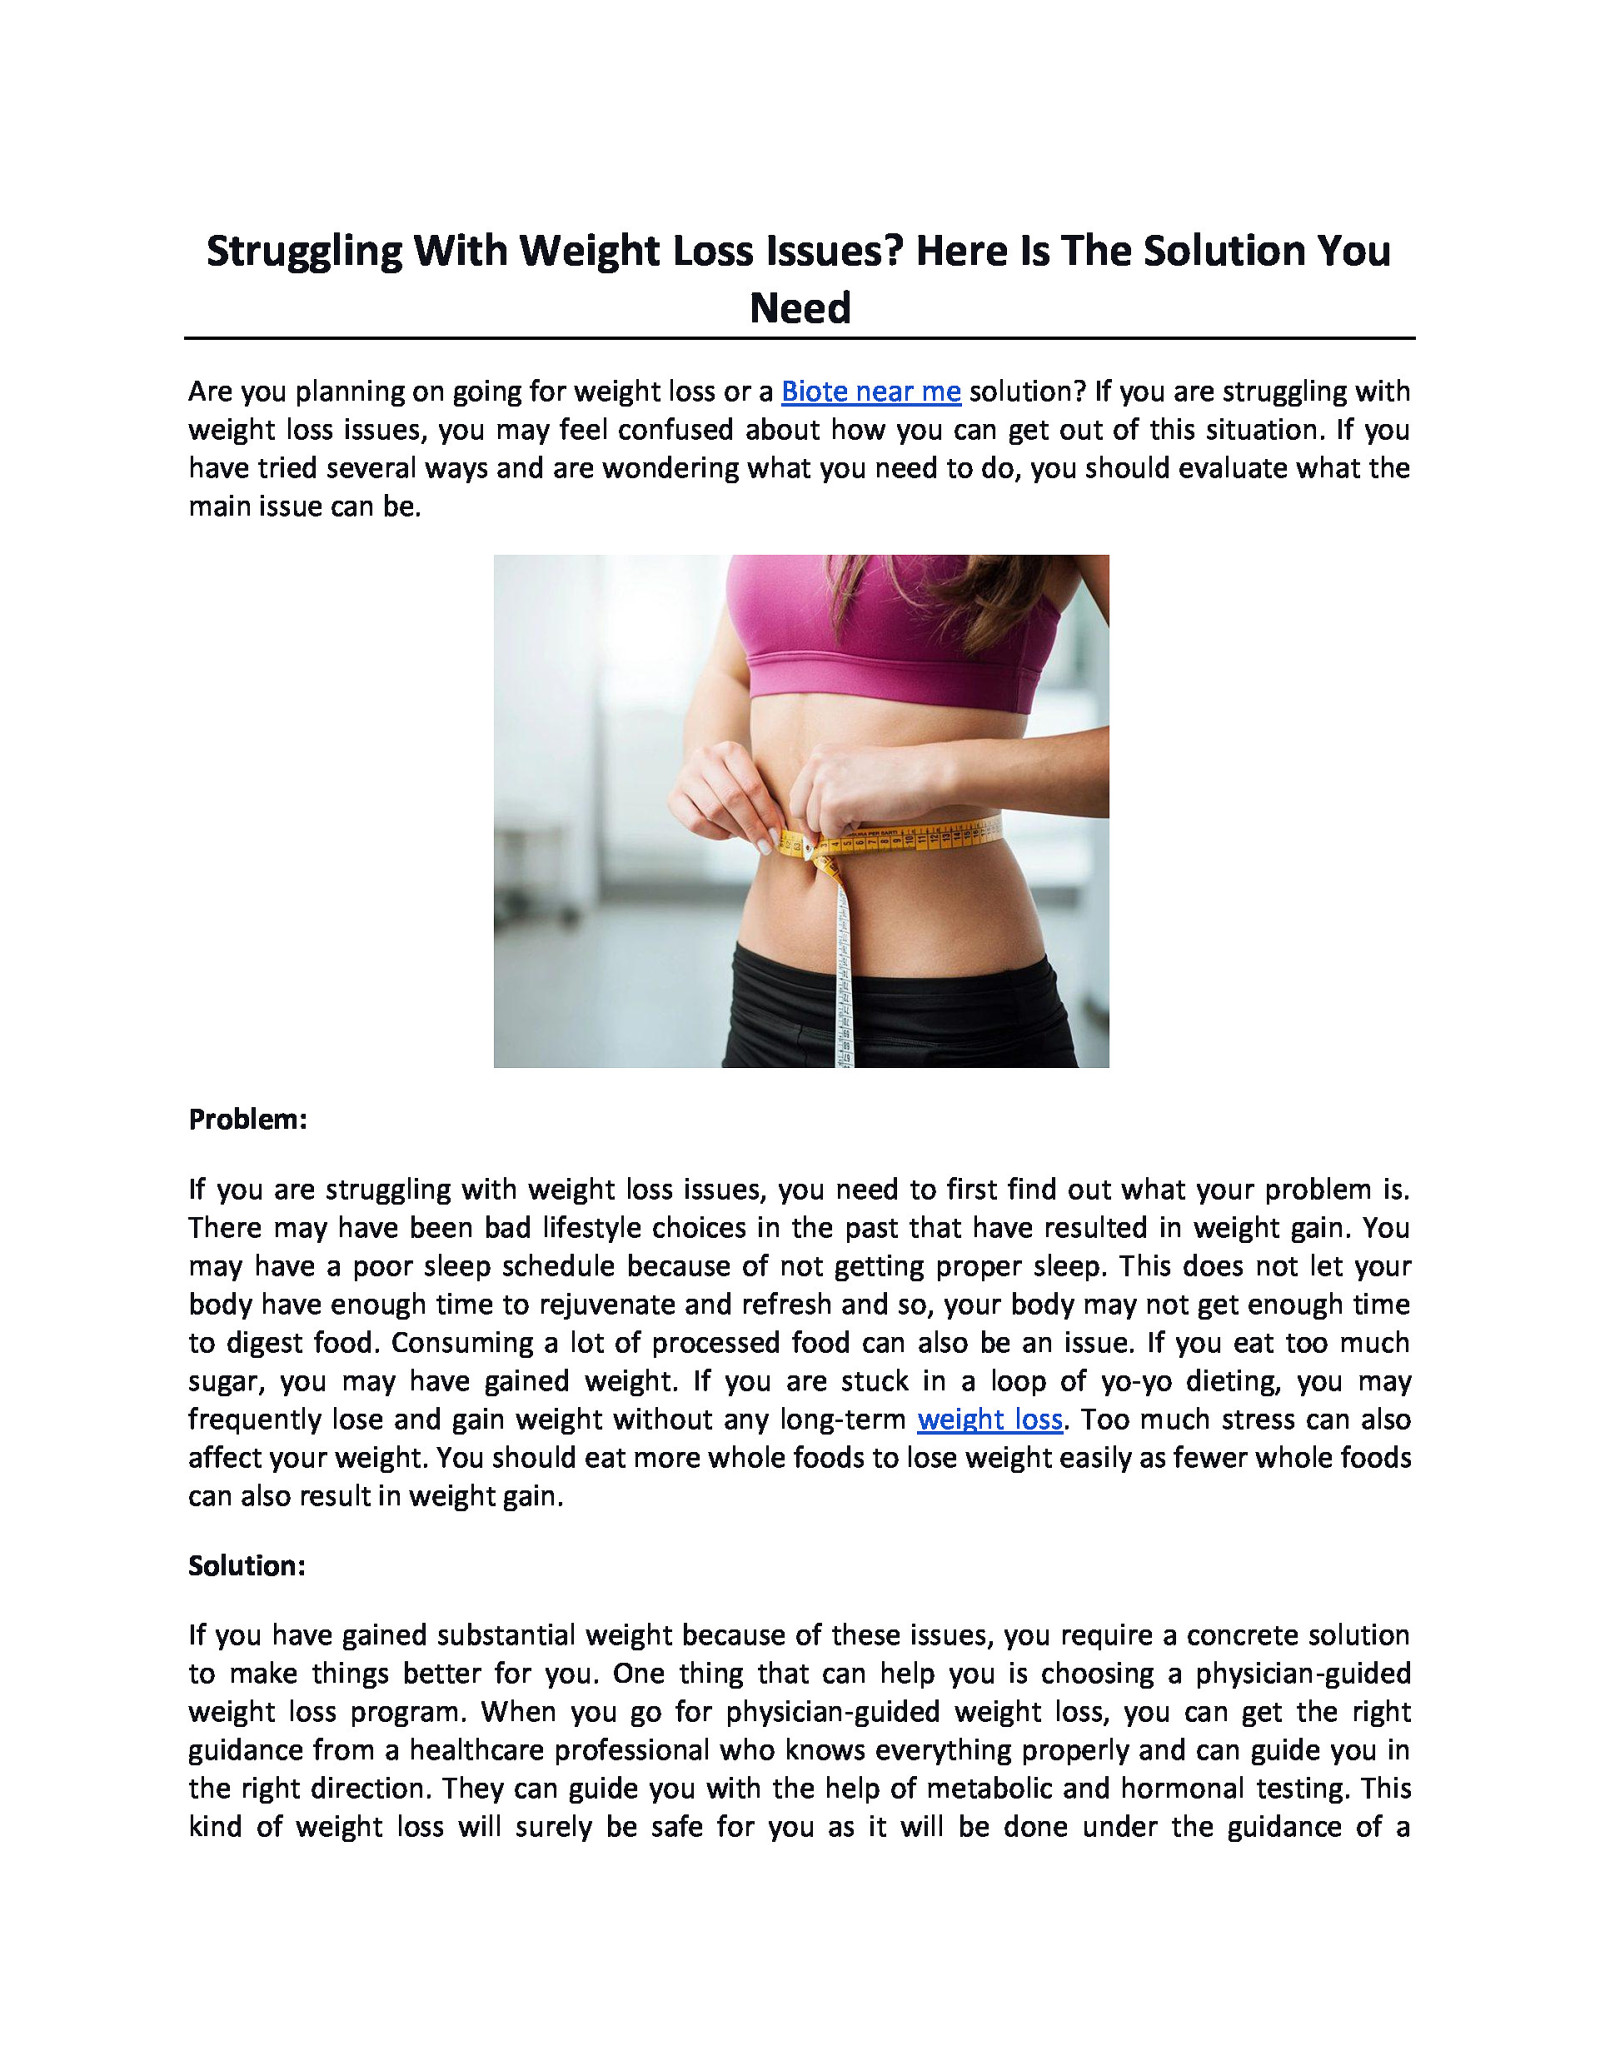 Struggling With Weight Loss Issues? Here Is The Solution You Need